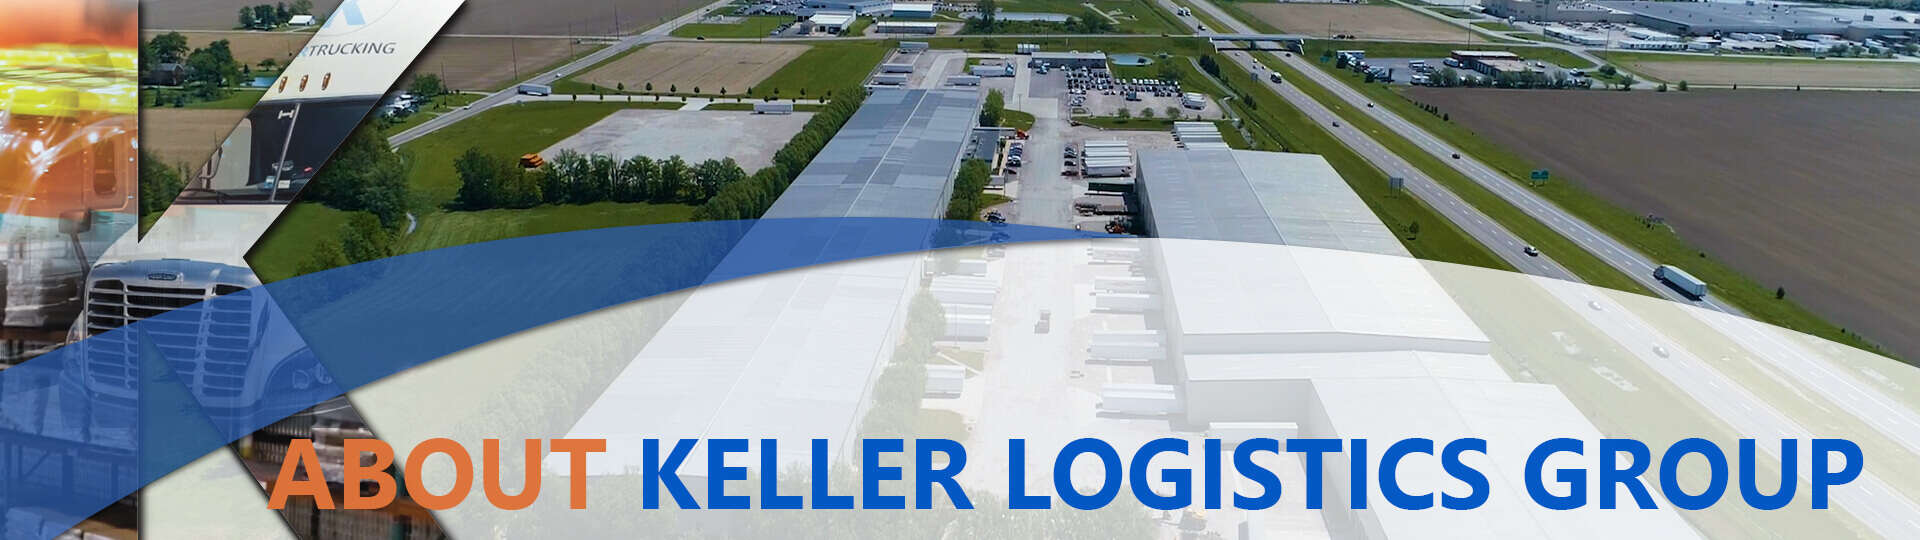 Aerial image of Keller Logistics Group complex with large K graphic and About Keller Logistics Group in text